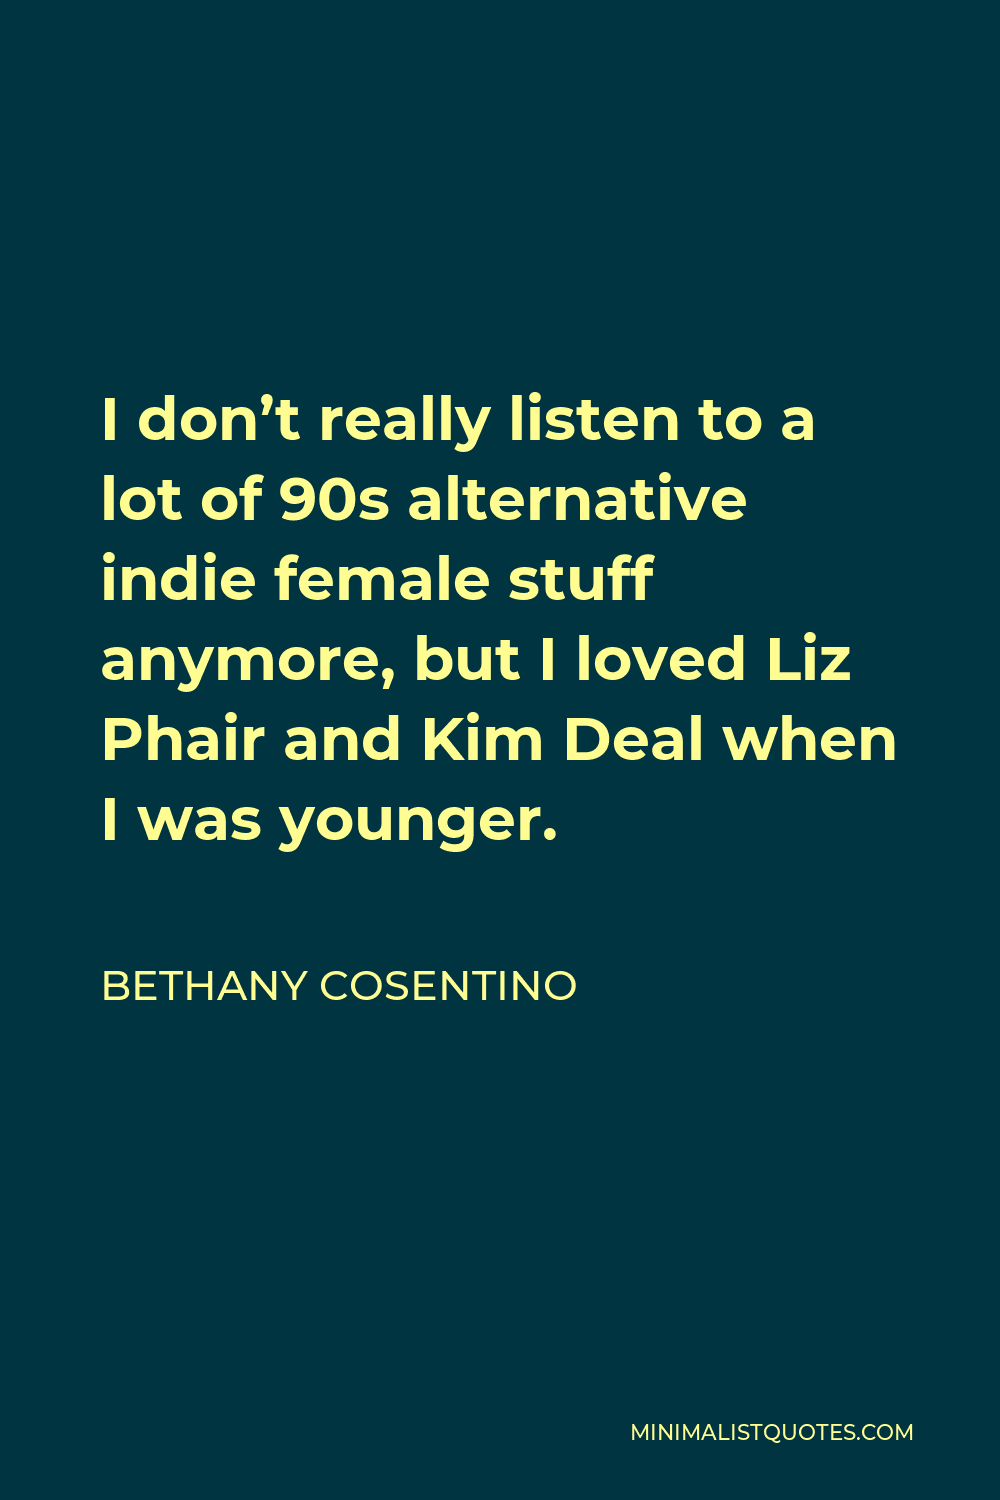 Bethany Cosentino Quote - I don’t really listen to a lot of 90s alternative indie female stuff anymore, but I loved Liz Phair and Kim Deal when I was younger.